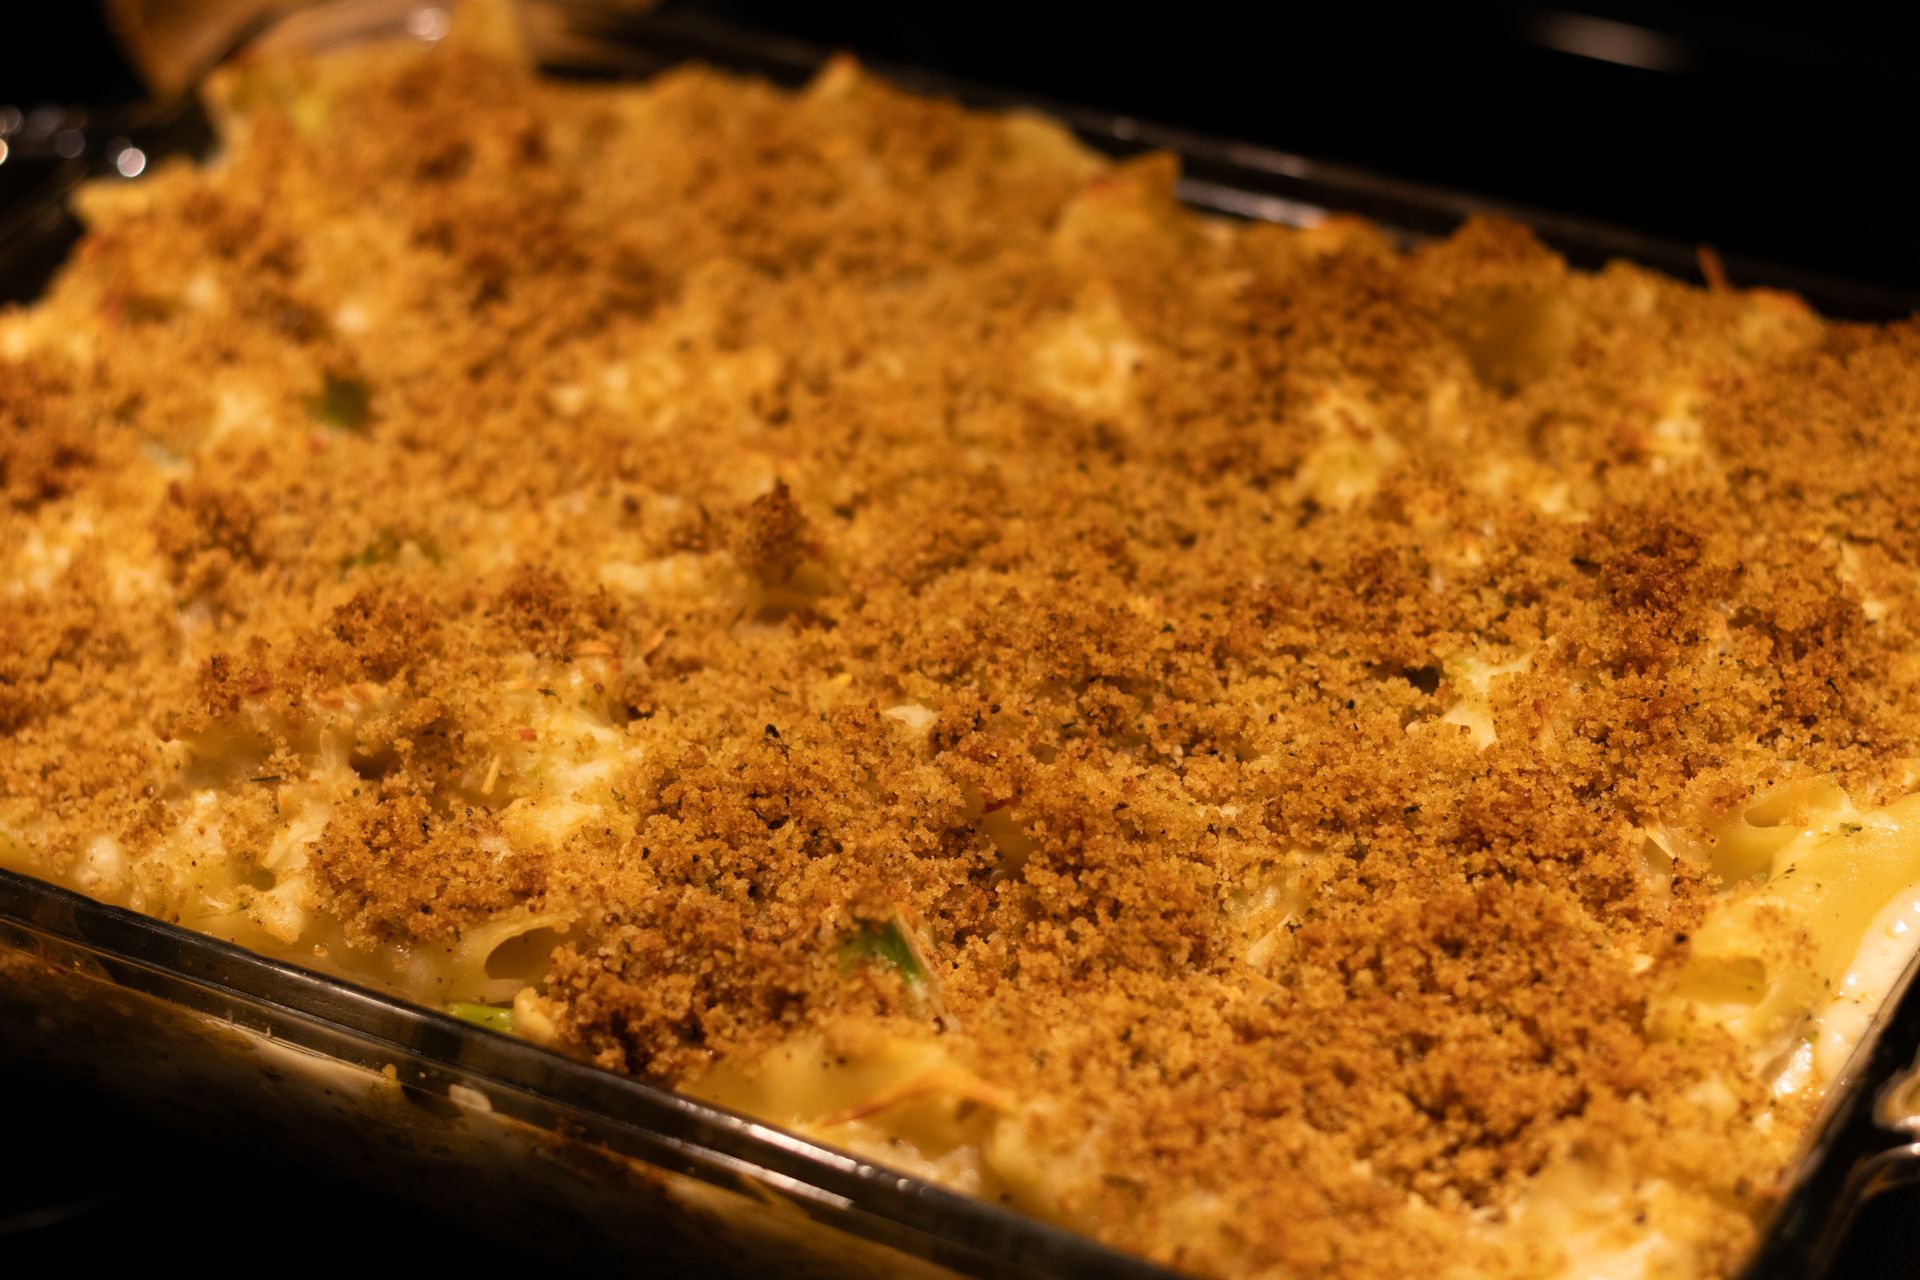 Baking pan filled with chicken and broccoli Alfredo bake in an oven